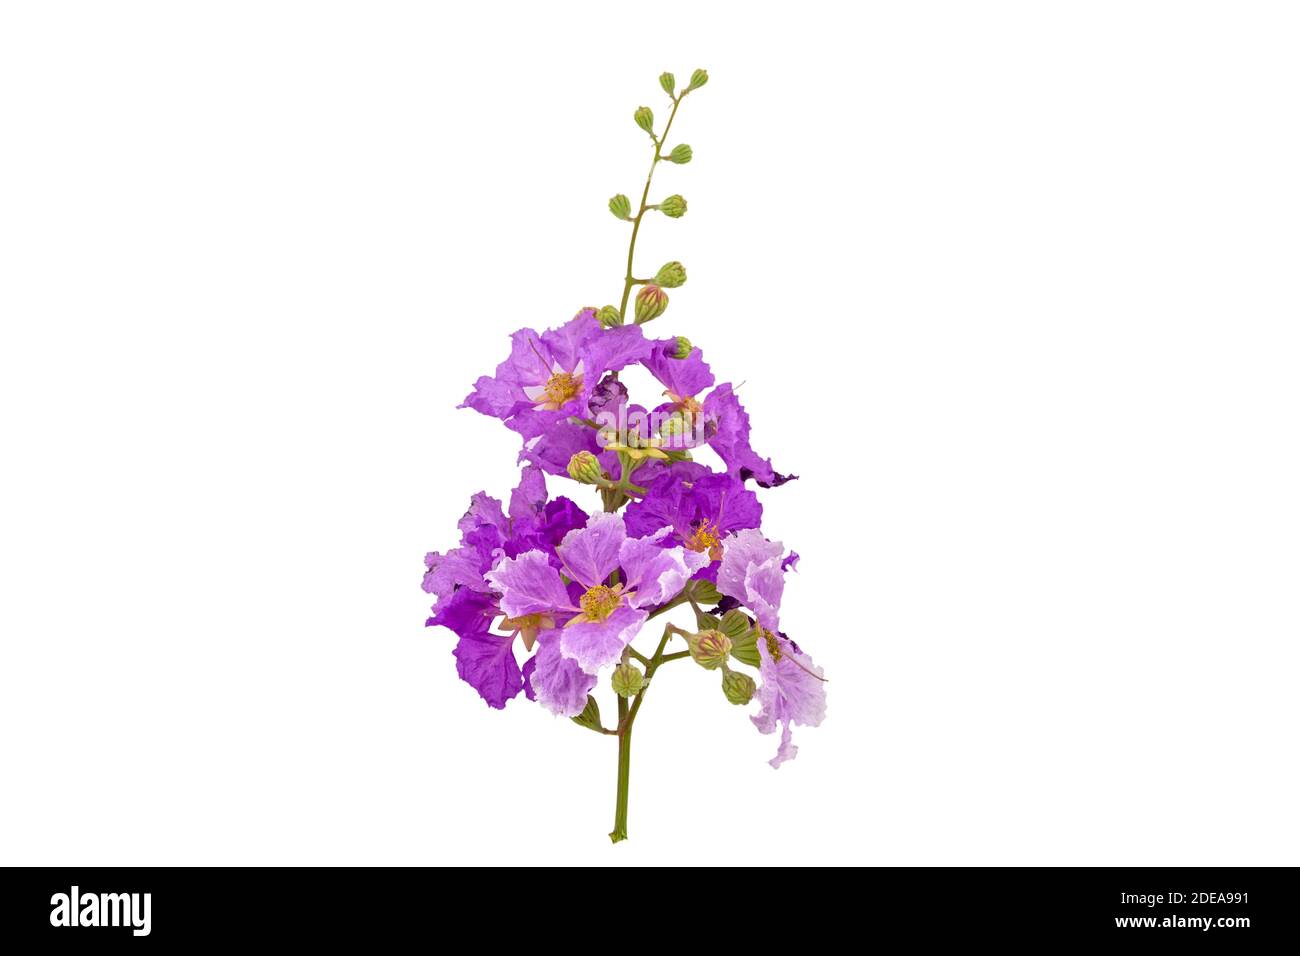 Queens crape myrtle flowers or Queen's flower, Lagerstroemia inermis Pers,Pride of India, Jarul isolated on white background.Saved with clipping path. Stock Photo